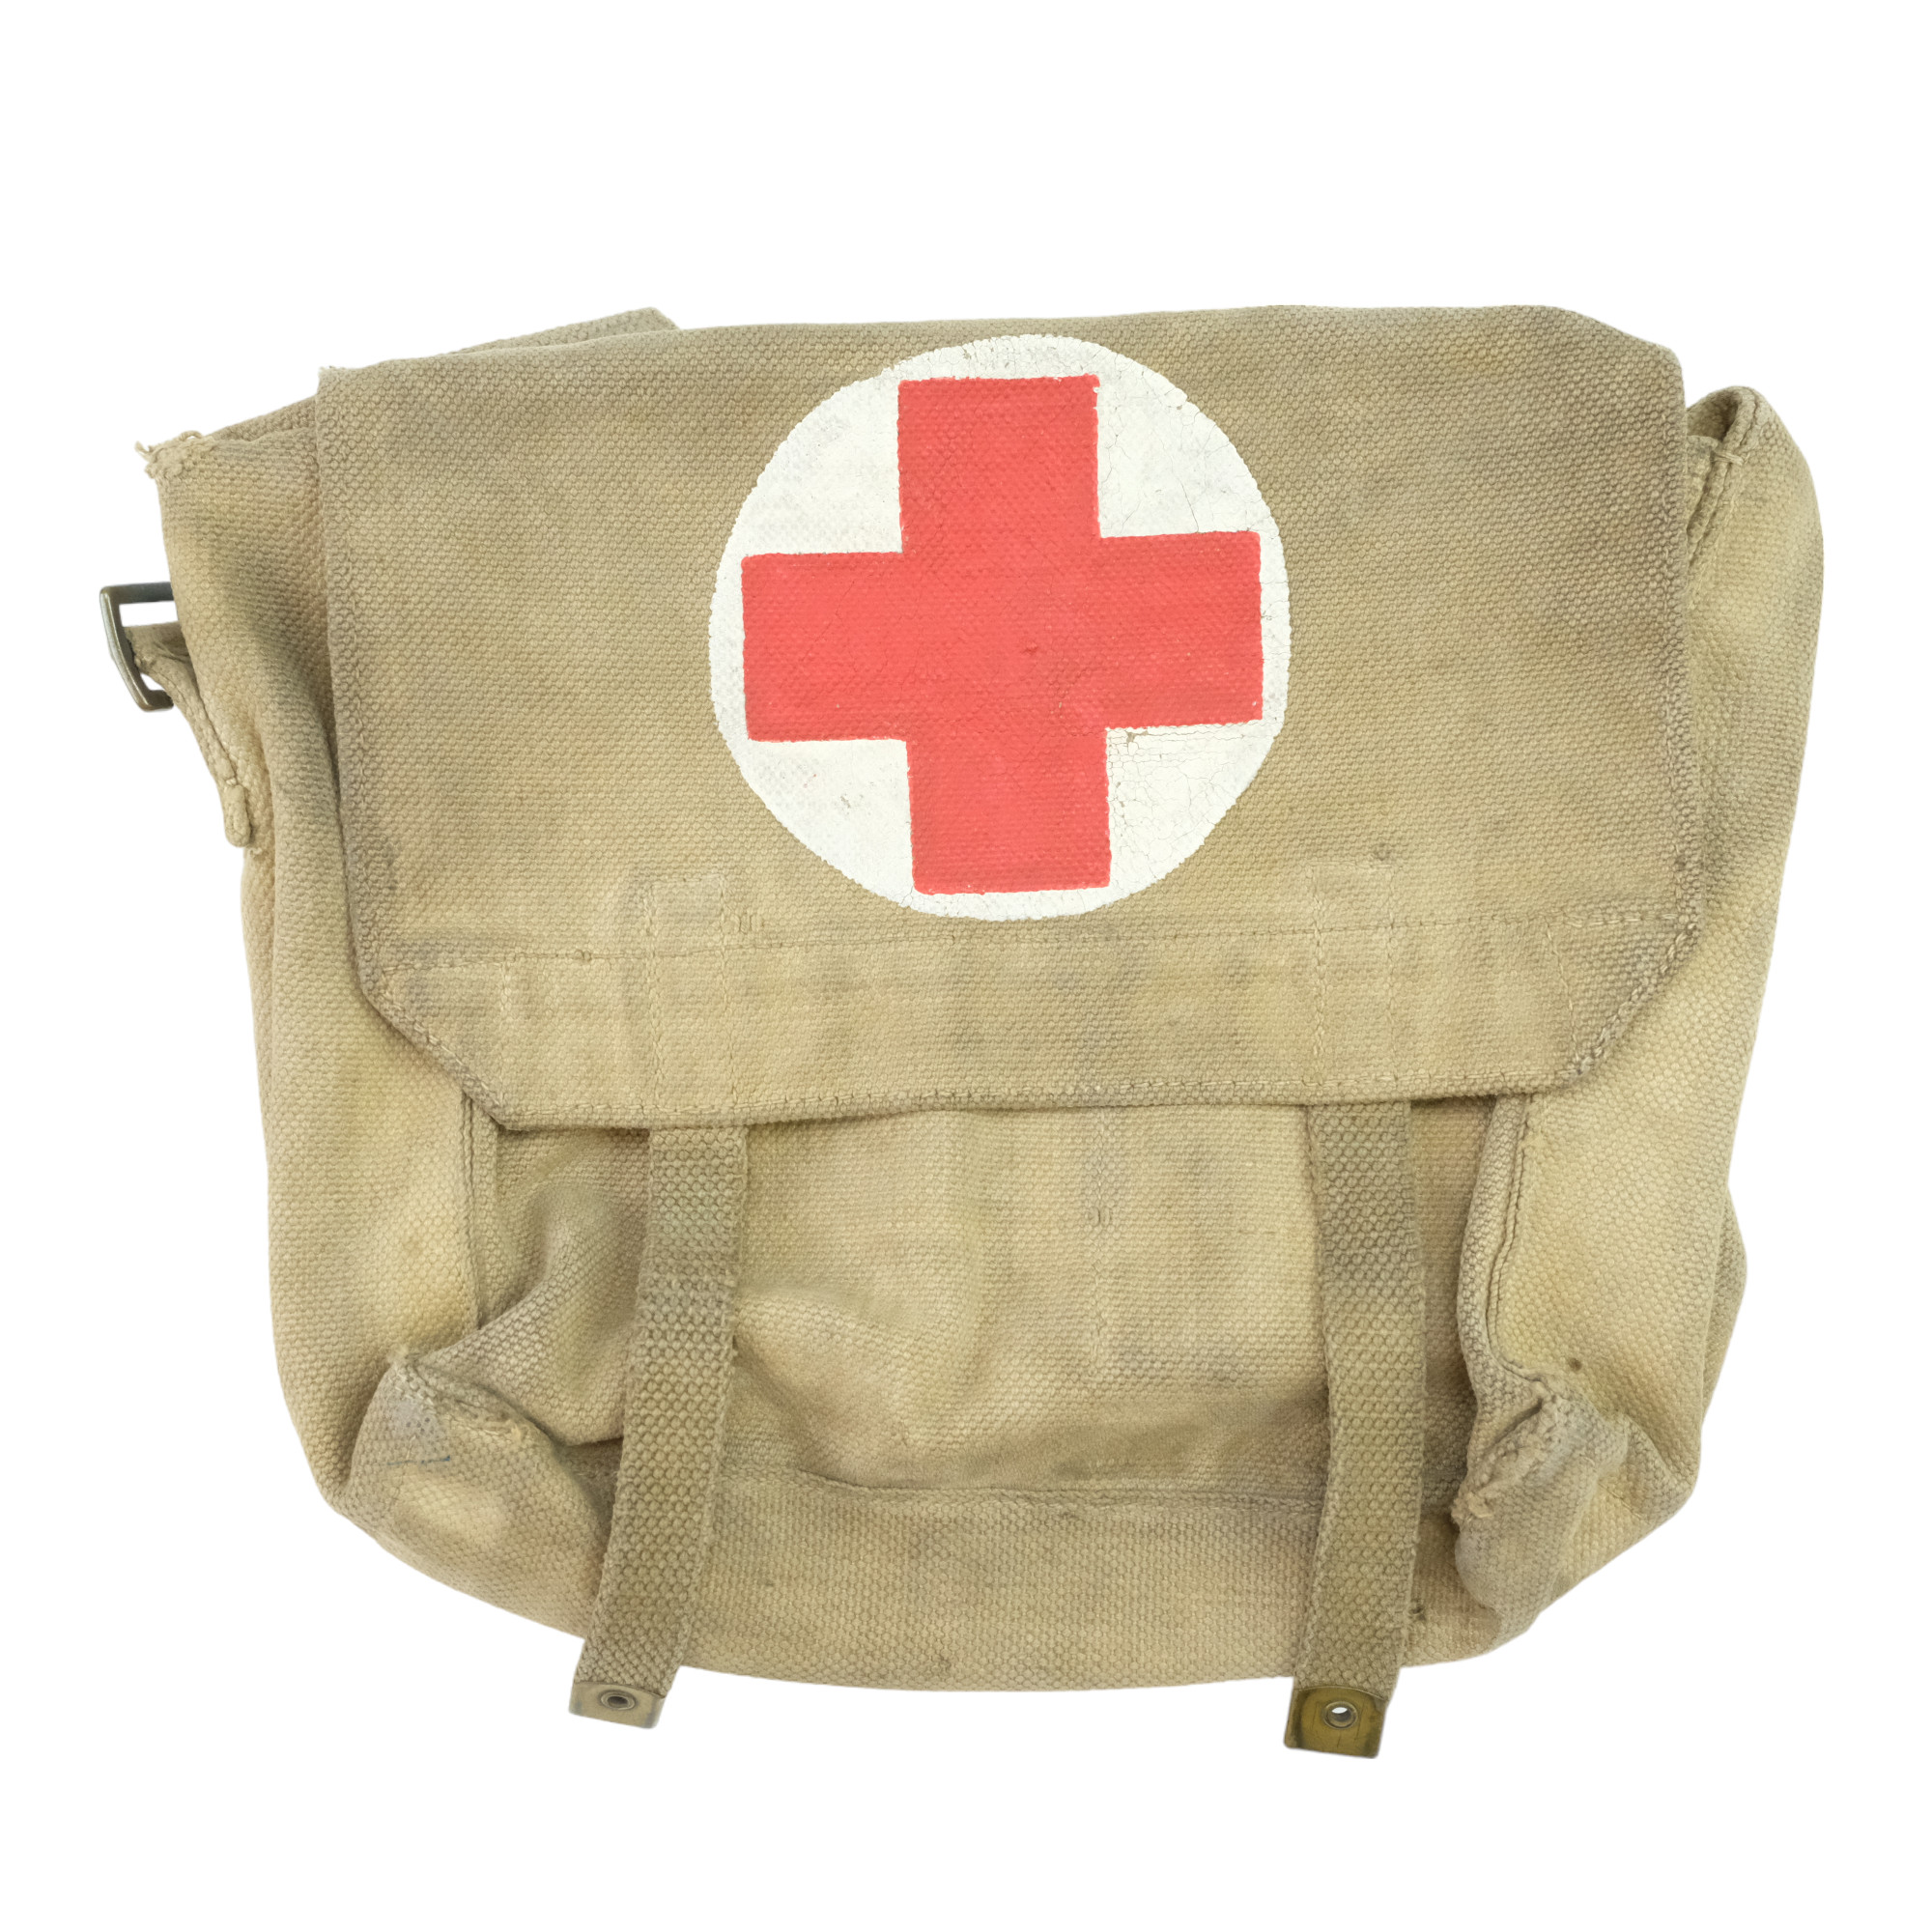 A Second World War British Army medic's webbing haversack / small pack